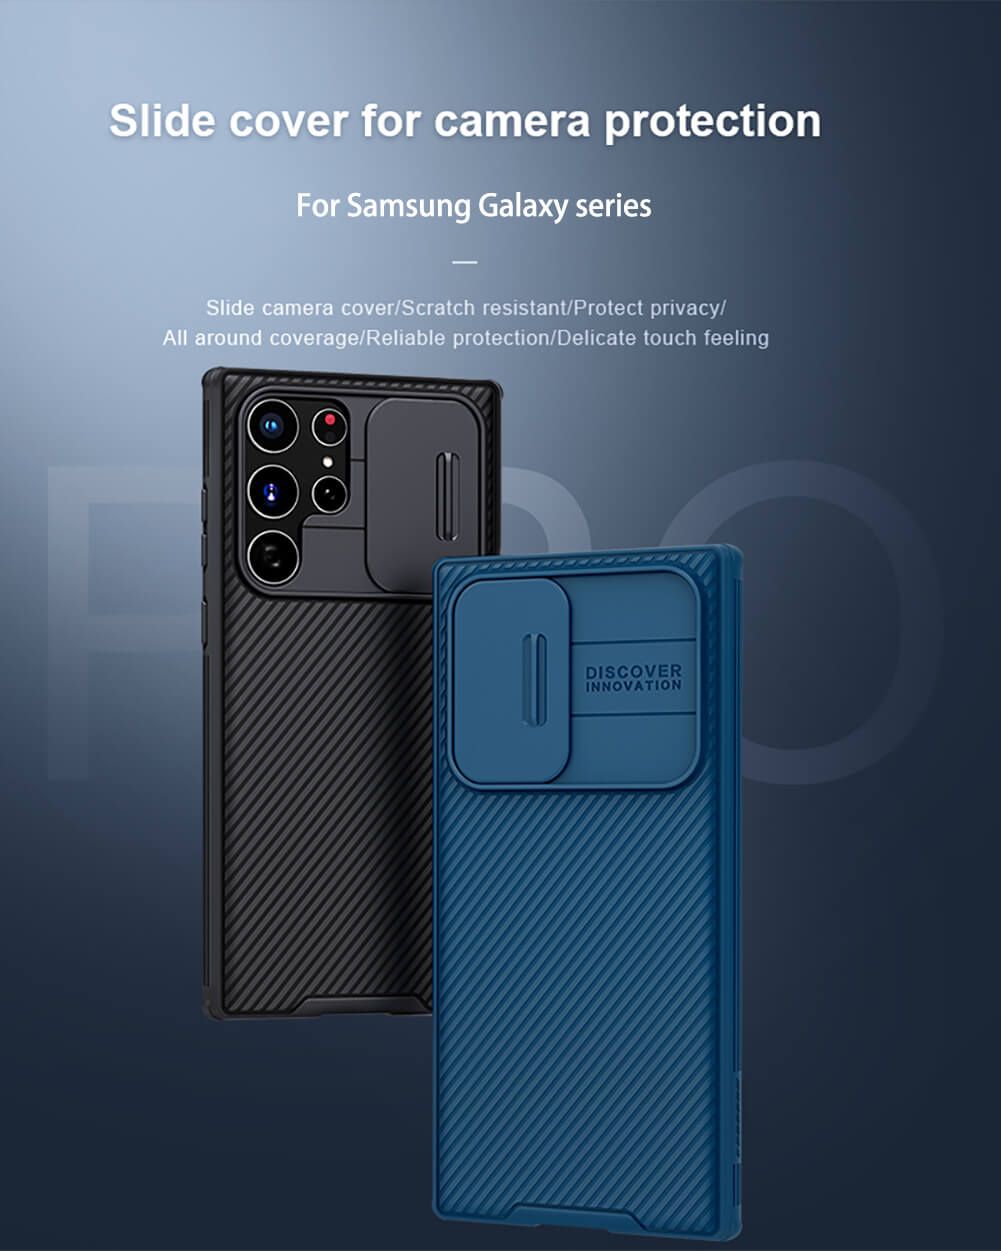 Slide cover protects camera phone case for samsung galaxy series